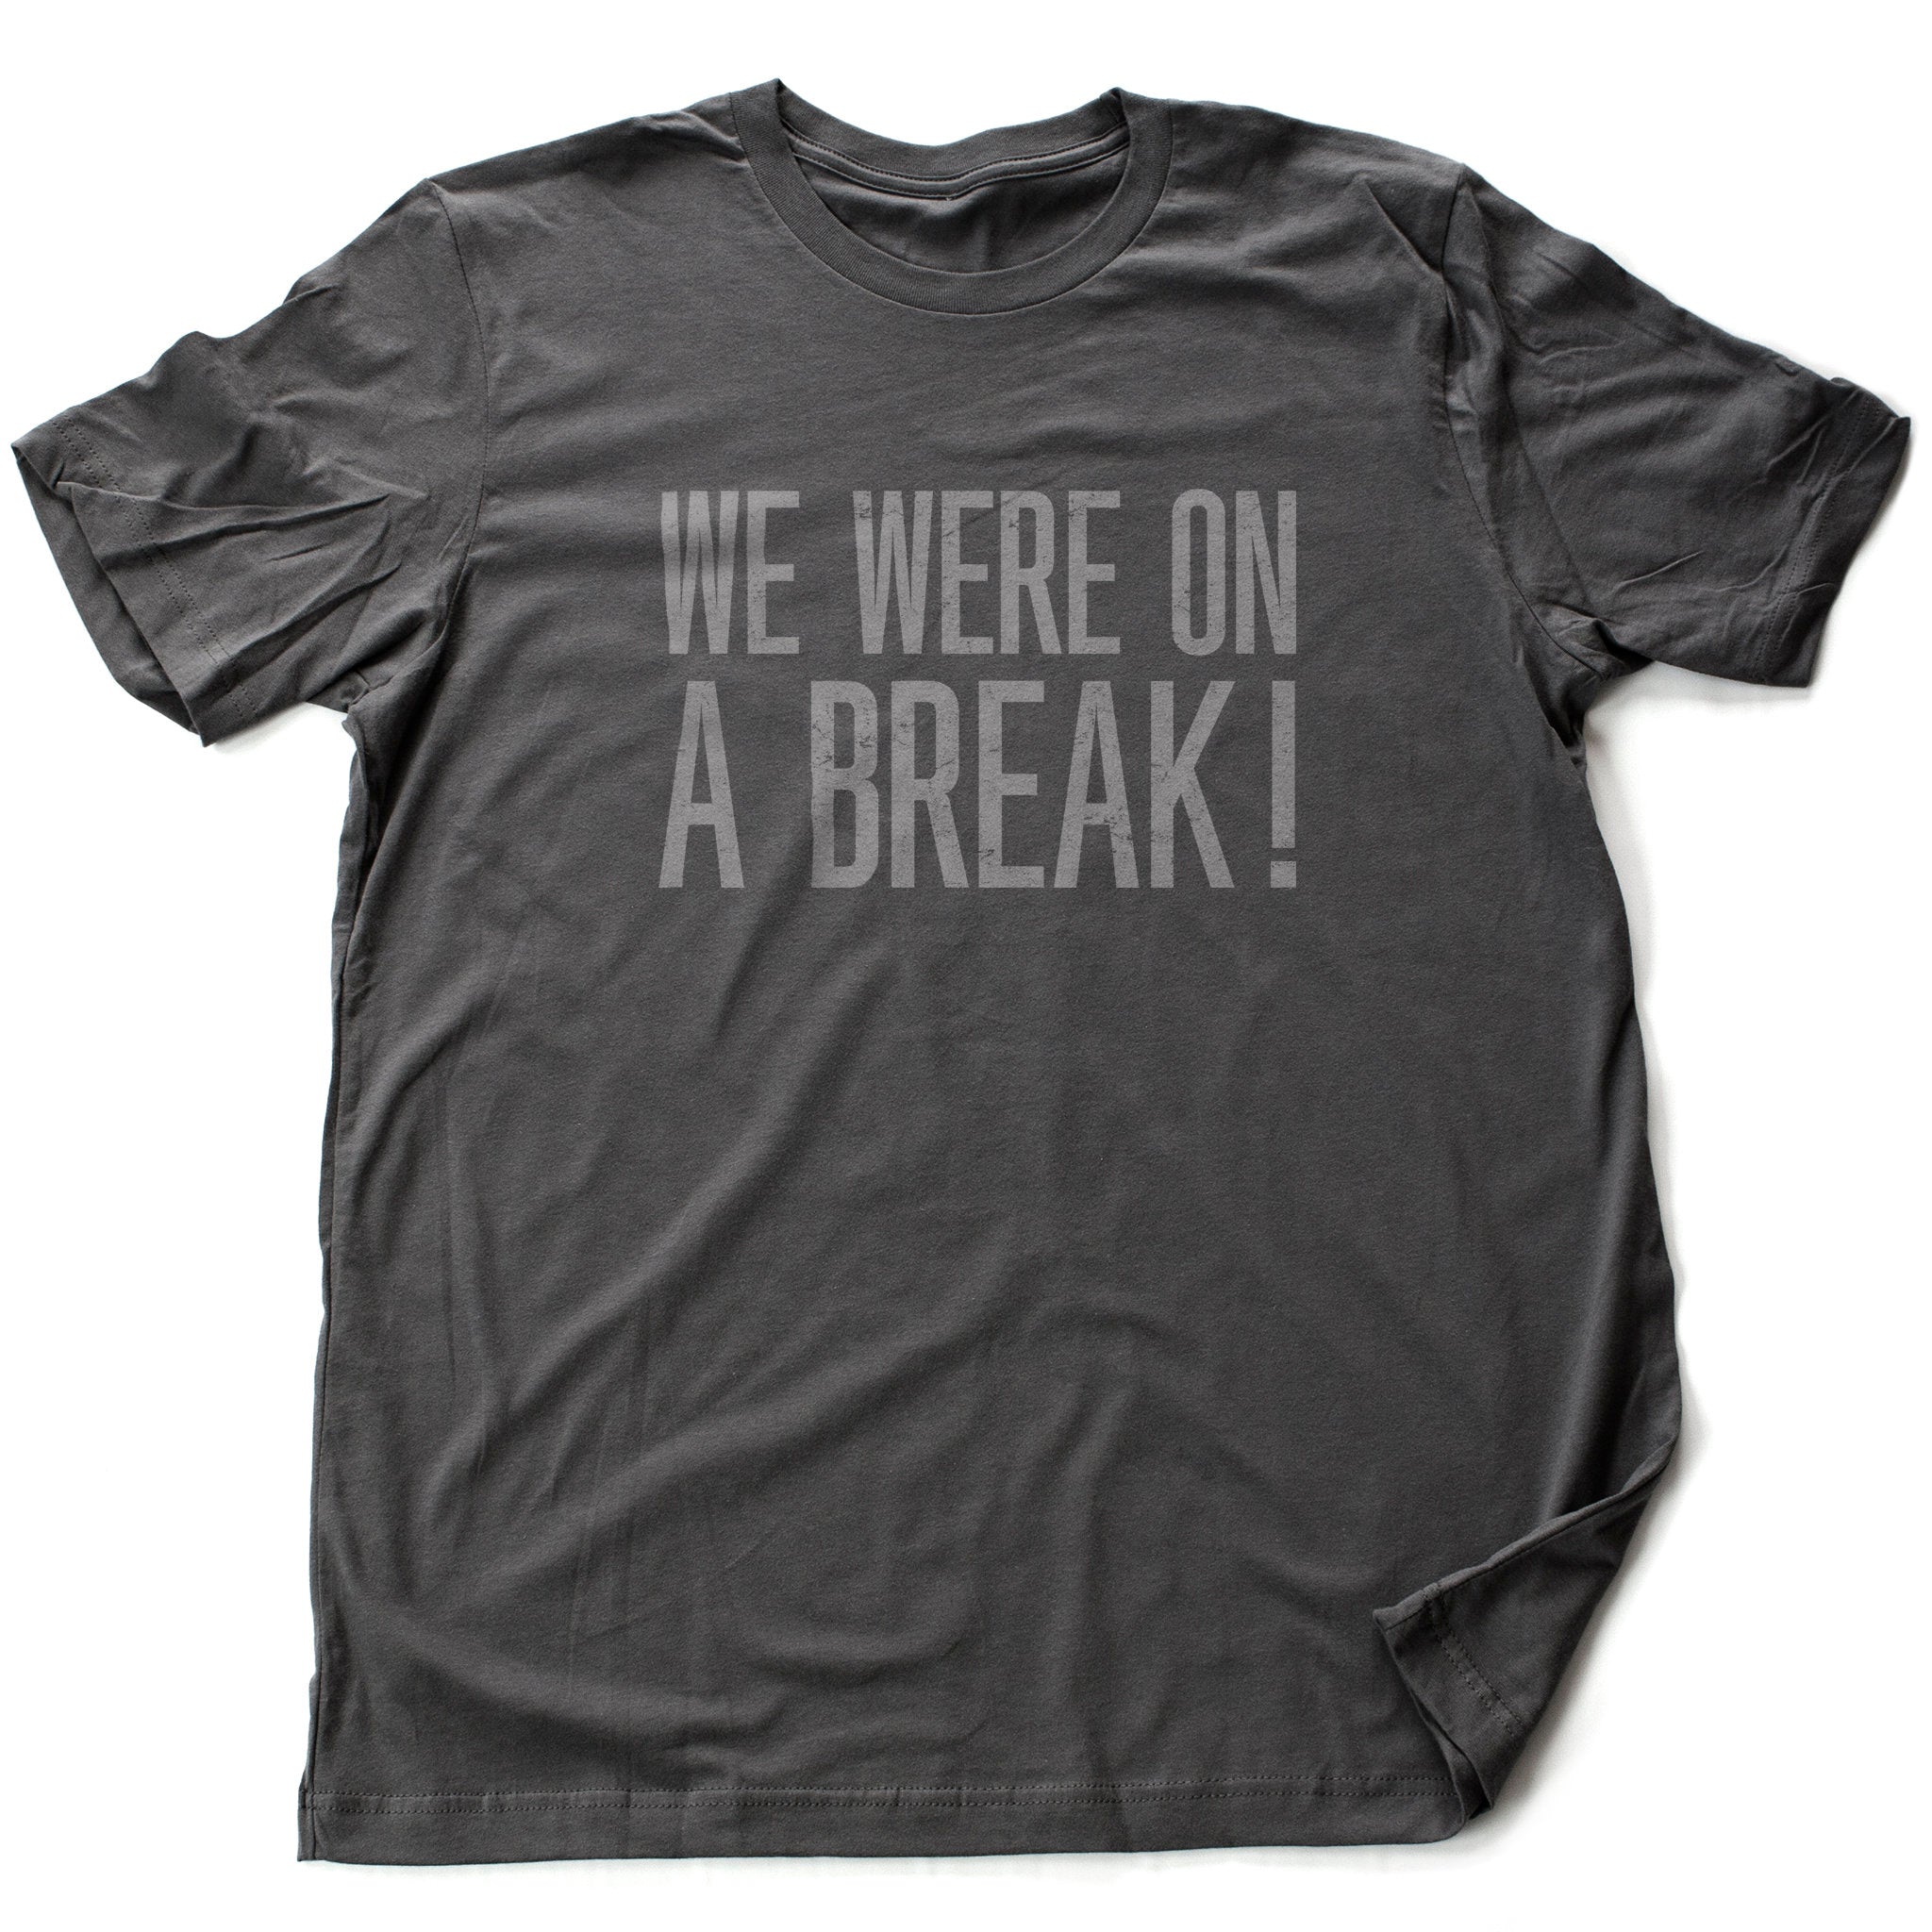 WE WERE on a BREAK! — [Friends reference] premium Tee